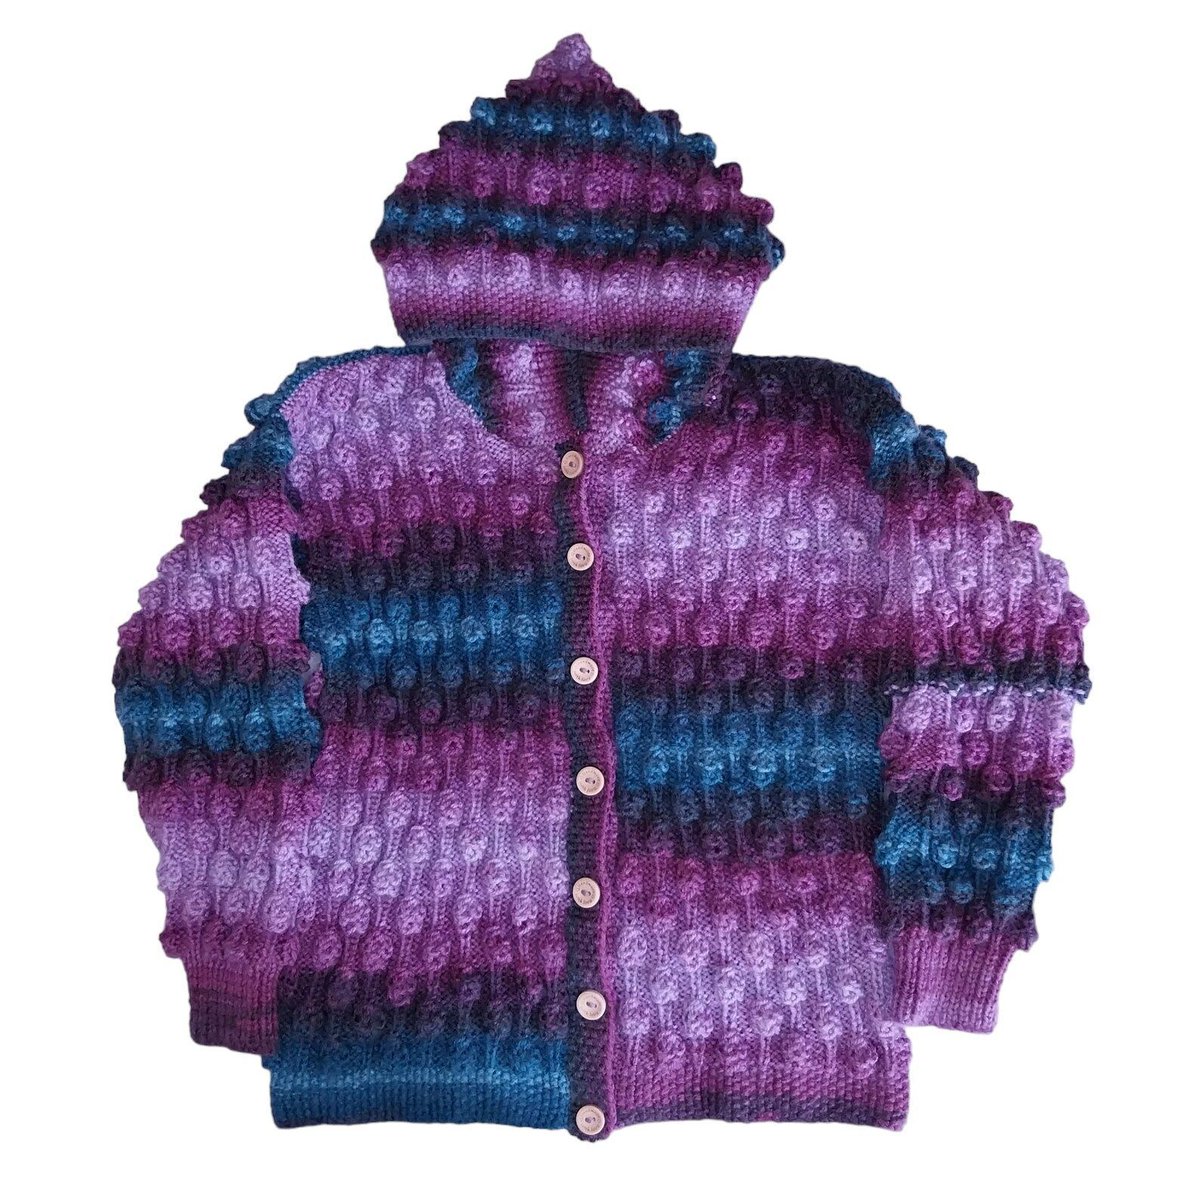 Stay warm in style with this Hand Knitted Children's Hooded Cardigan. Perfect for ages 6-7. Visit knittingtopia.etsy.com/listing/170152… for your little one's new favorite bobble jacket. #Knittingtopia #etsy #craftbizparty #MHHSBD #handknitted #etsyshop #tweeturbiz